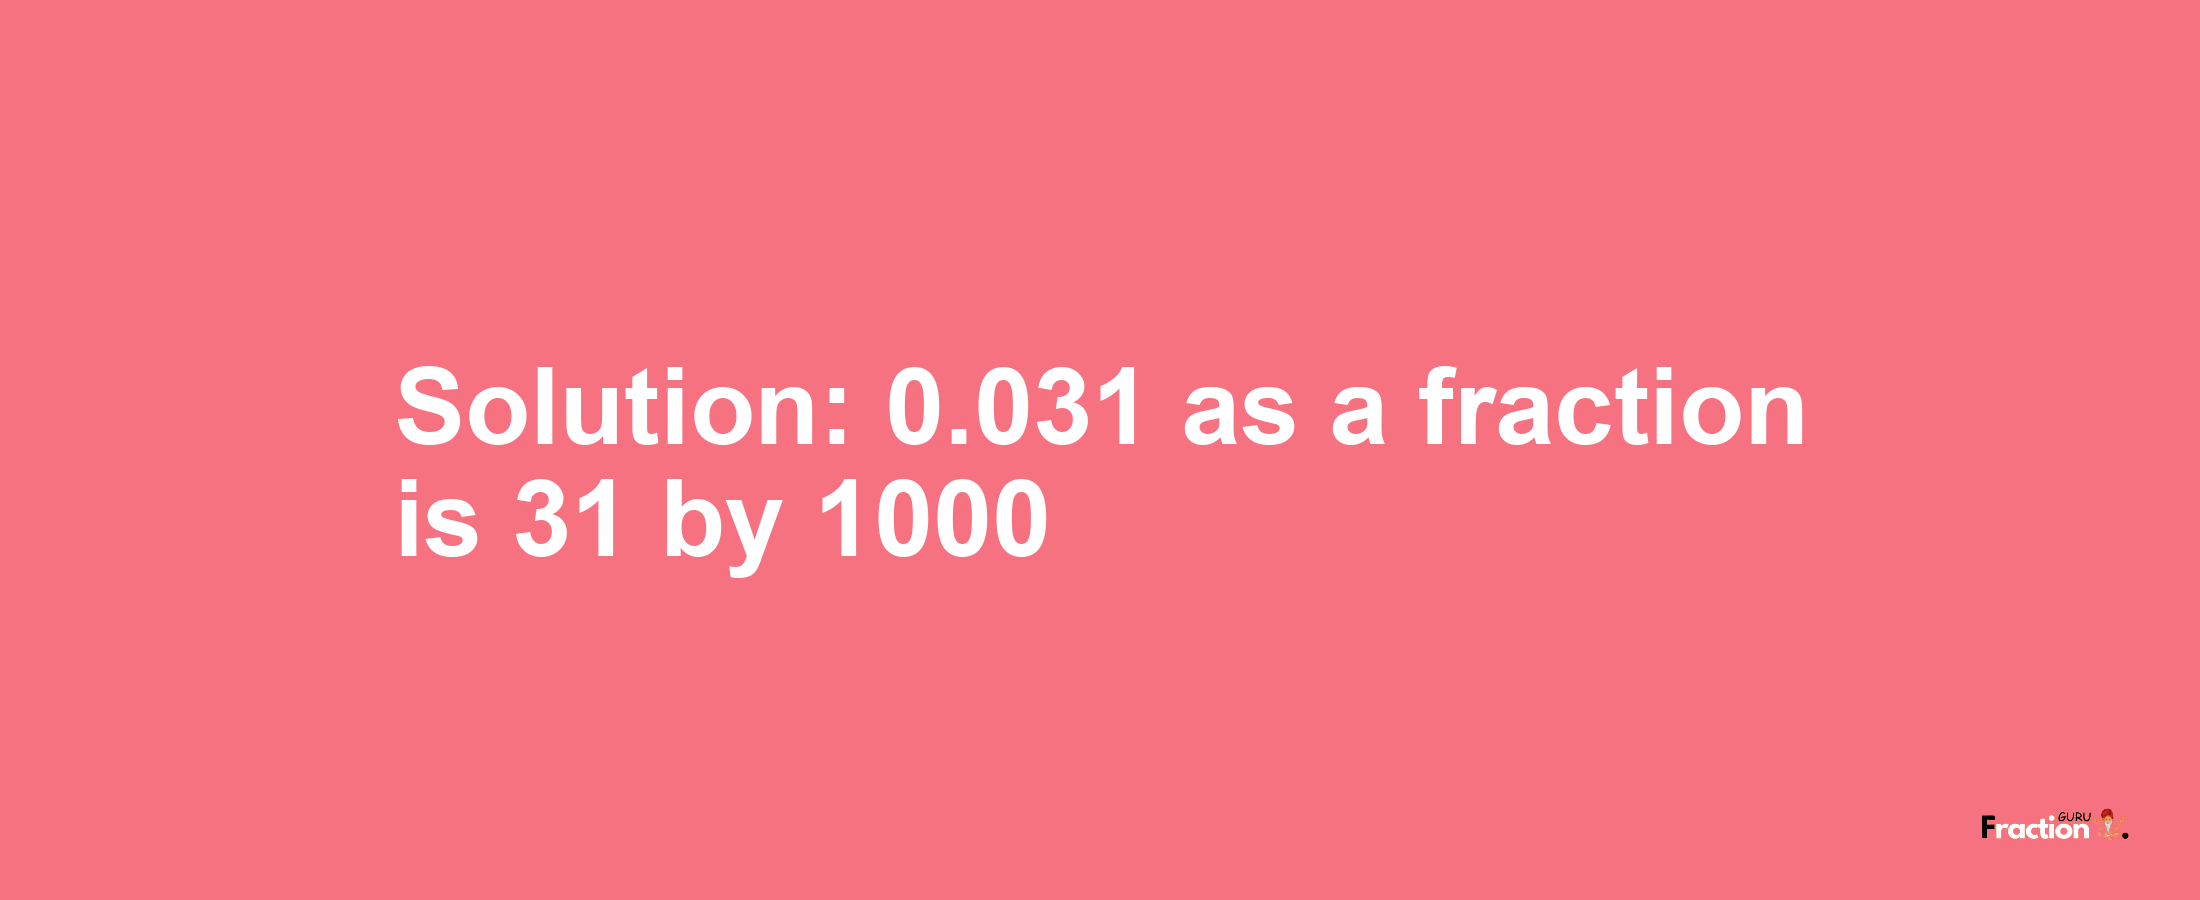 Solution:0.031 as a fraction is 31/1000